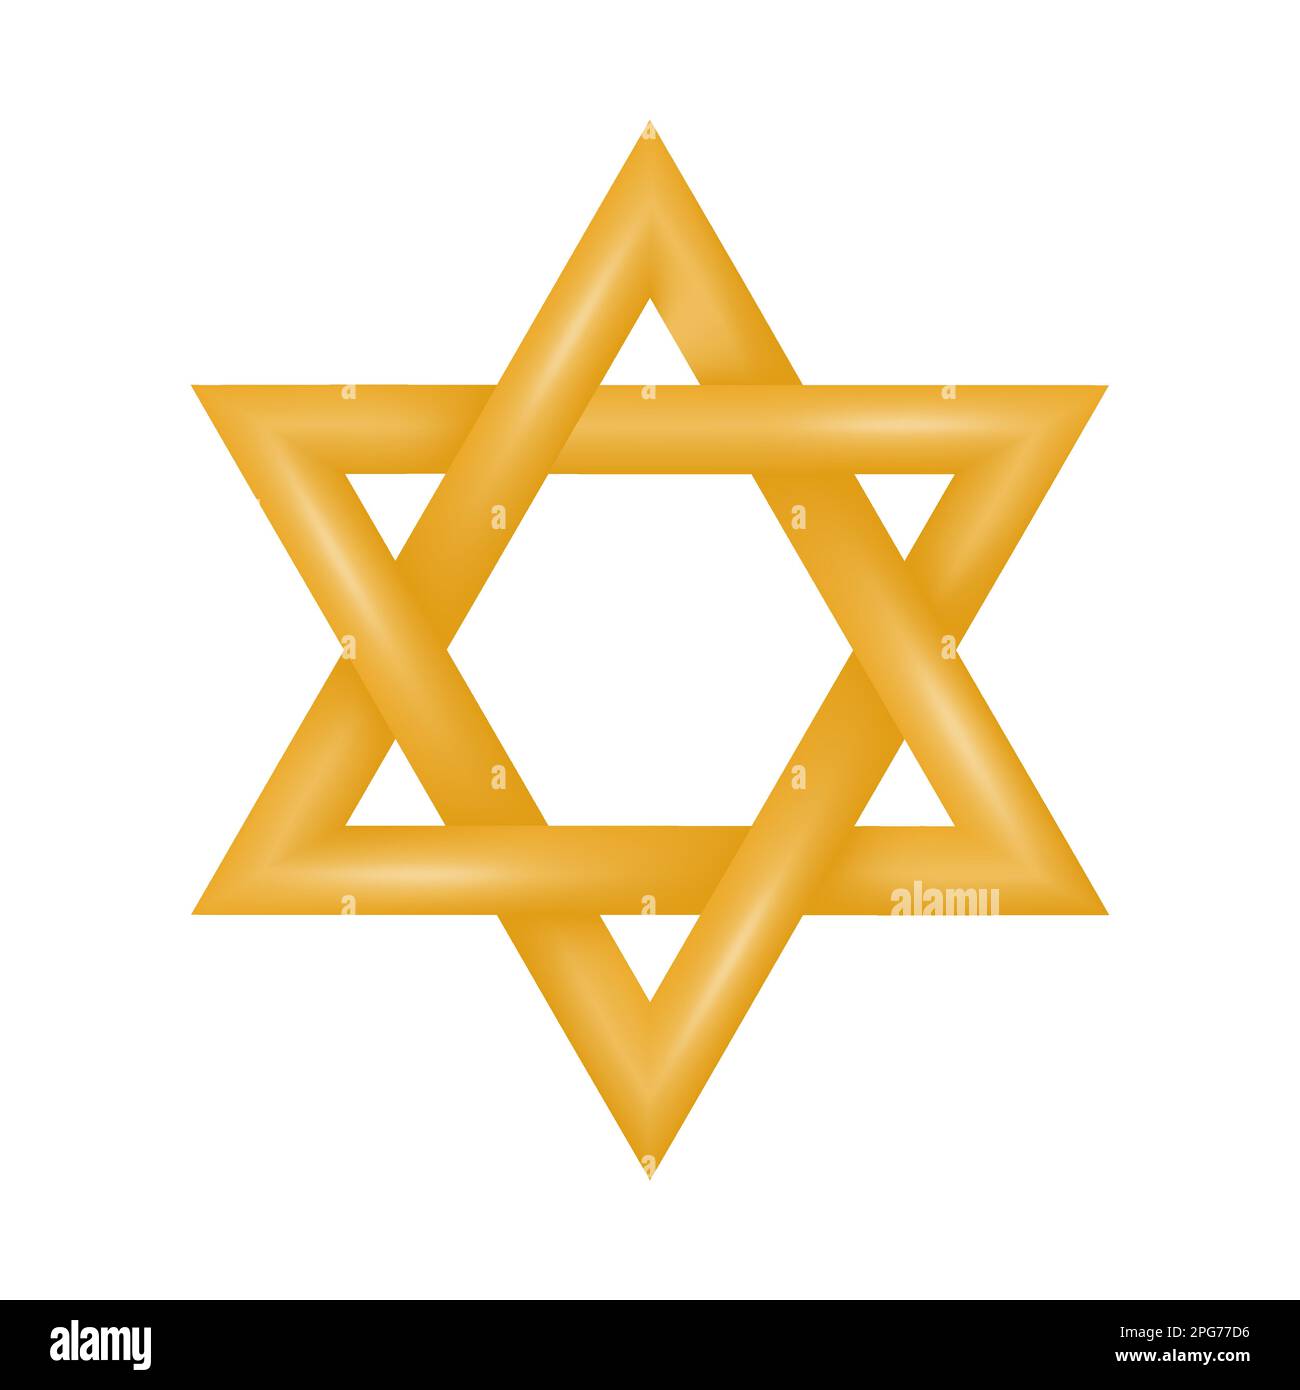 Golden six pointed Star of David. Symbol of Jewish identity and Judaism. Vector illustration. Stock Vector